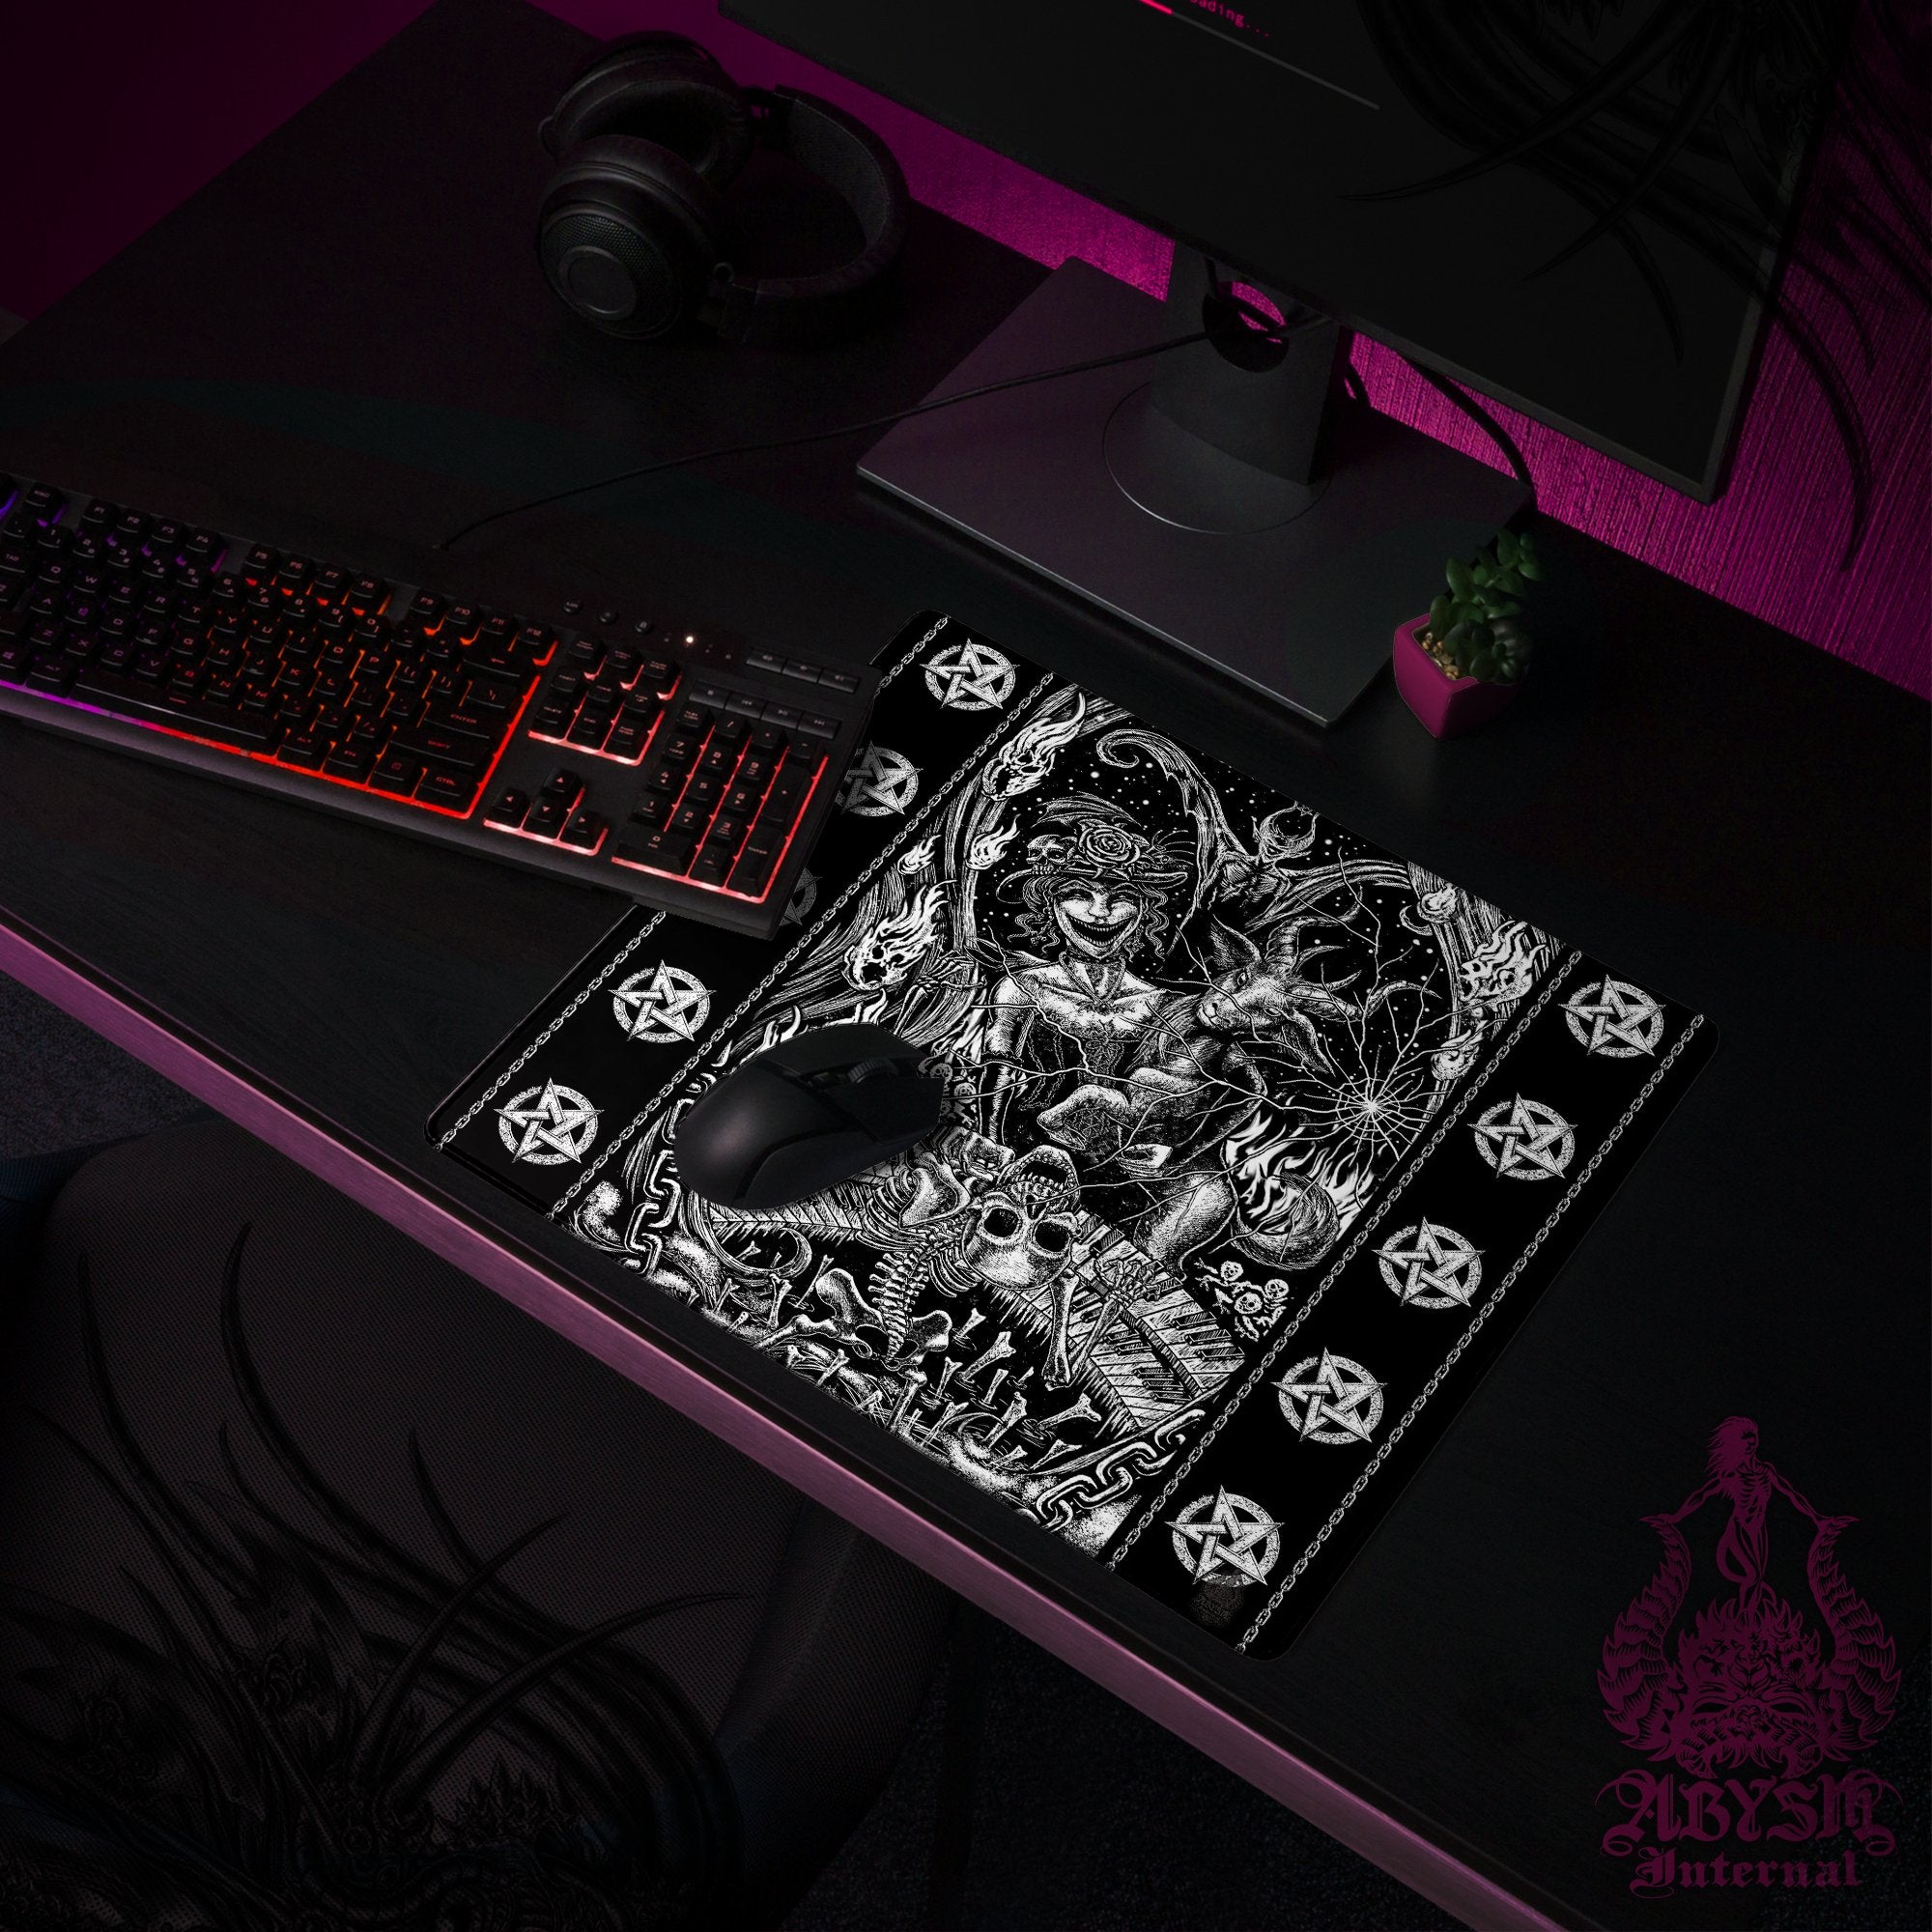 Gothic Mouse Pad, Goth Hell Gaming Desk Mat, Pentagrams Workpad, Satanic Table Protector Cover, Dark Fantasy Art Print - Merry - Abysm Internal